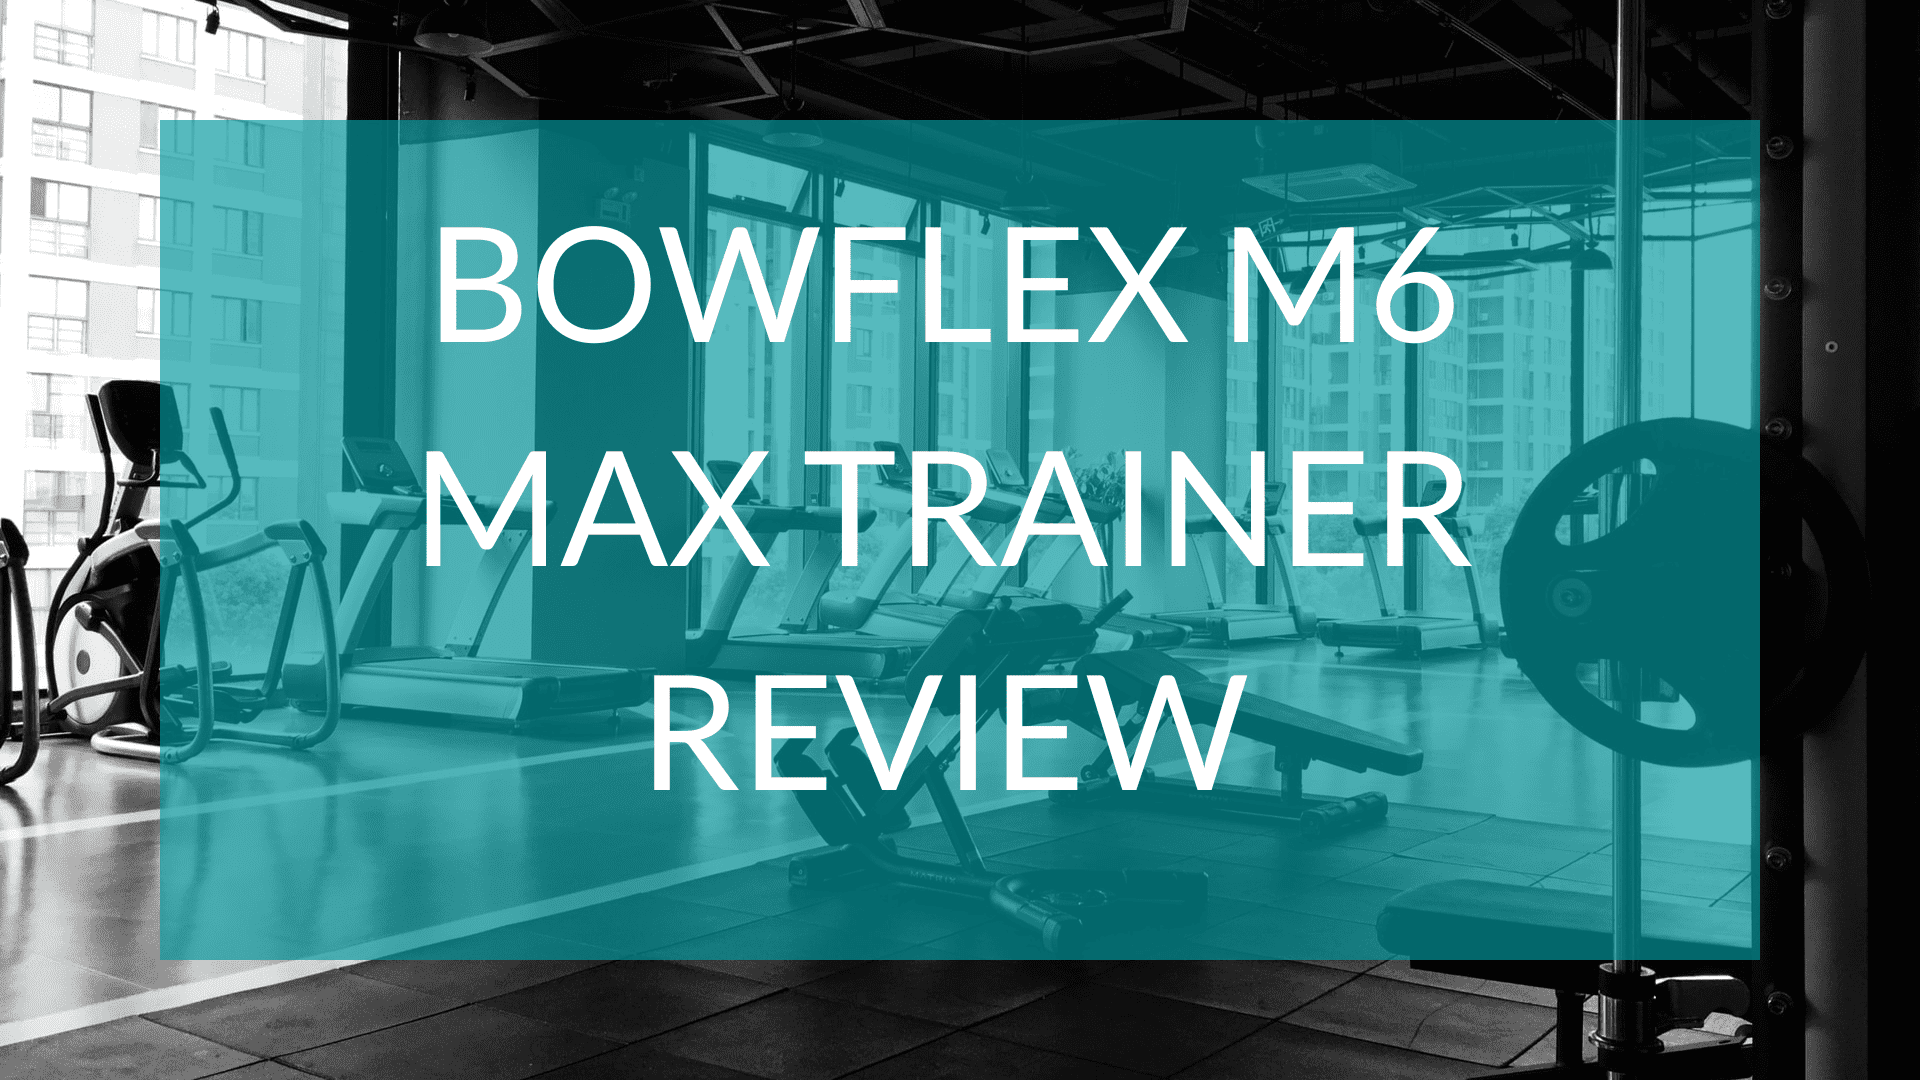 Text overlay reads Bowflex M6 Max Trainer Review, background image is a gym